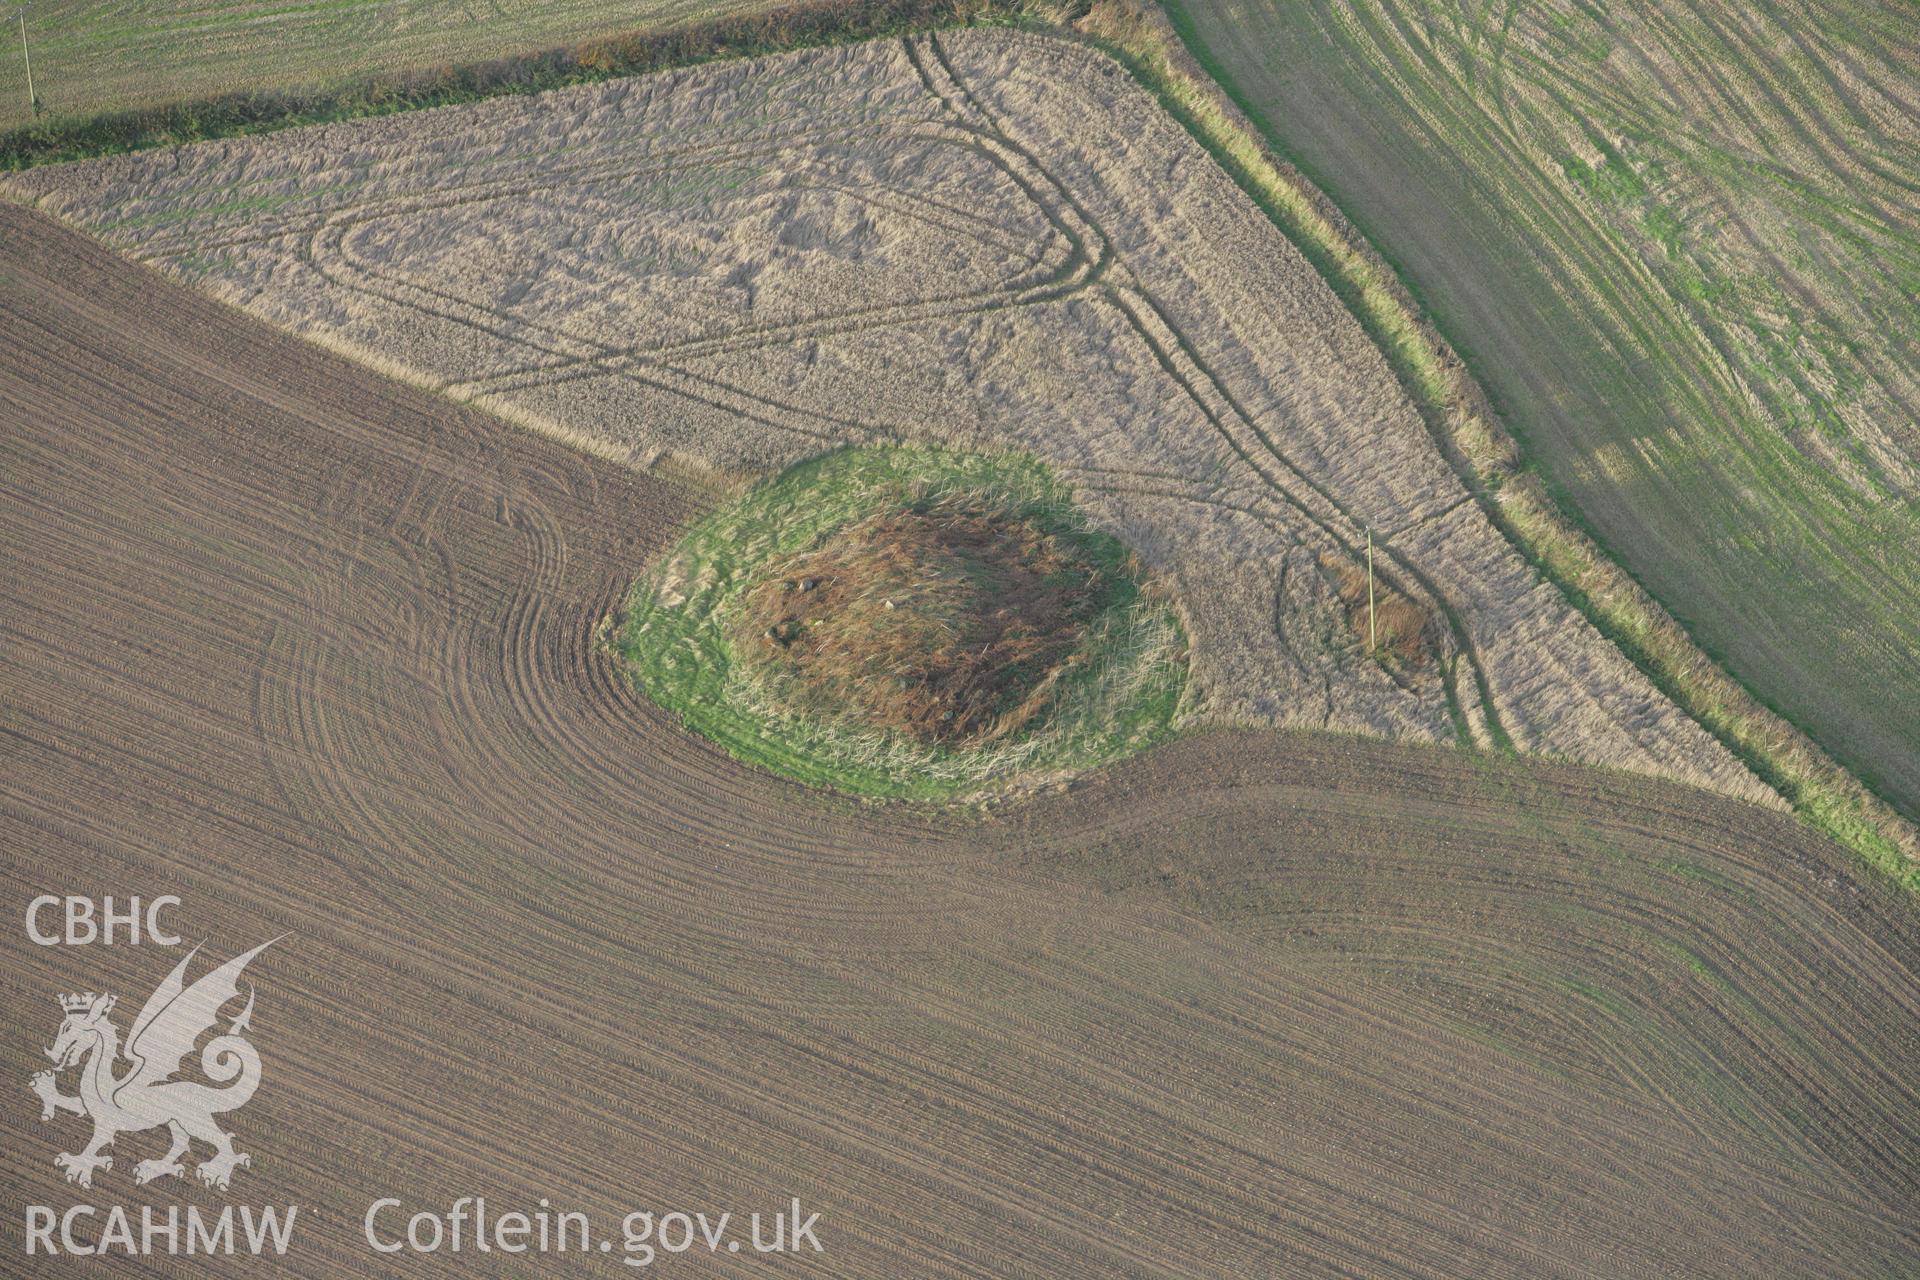 RCAHMW colour oblique photograph of Mynydd Herbert Round Barrow. Taken by Toby Driver on 12/11/2008.